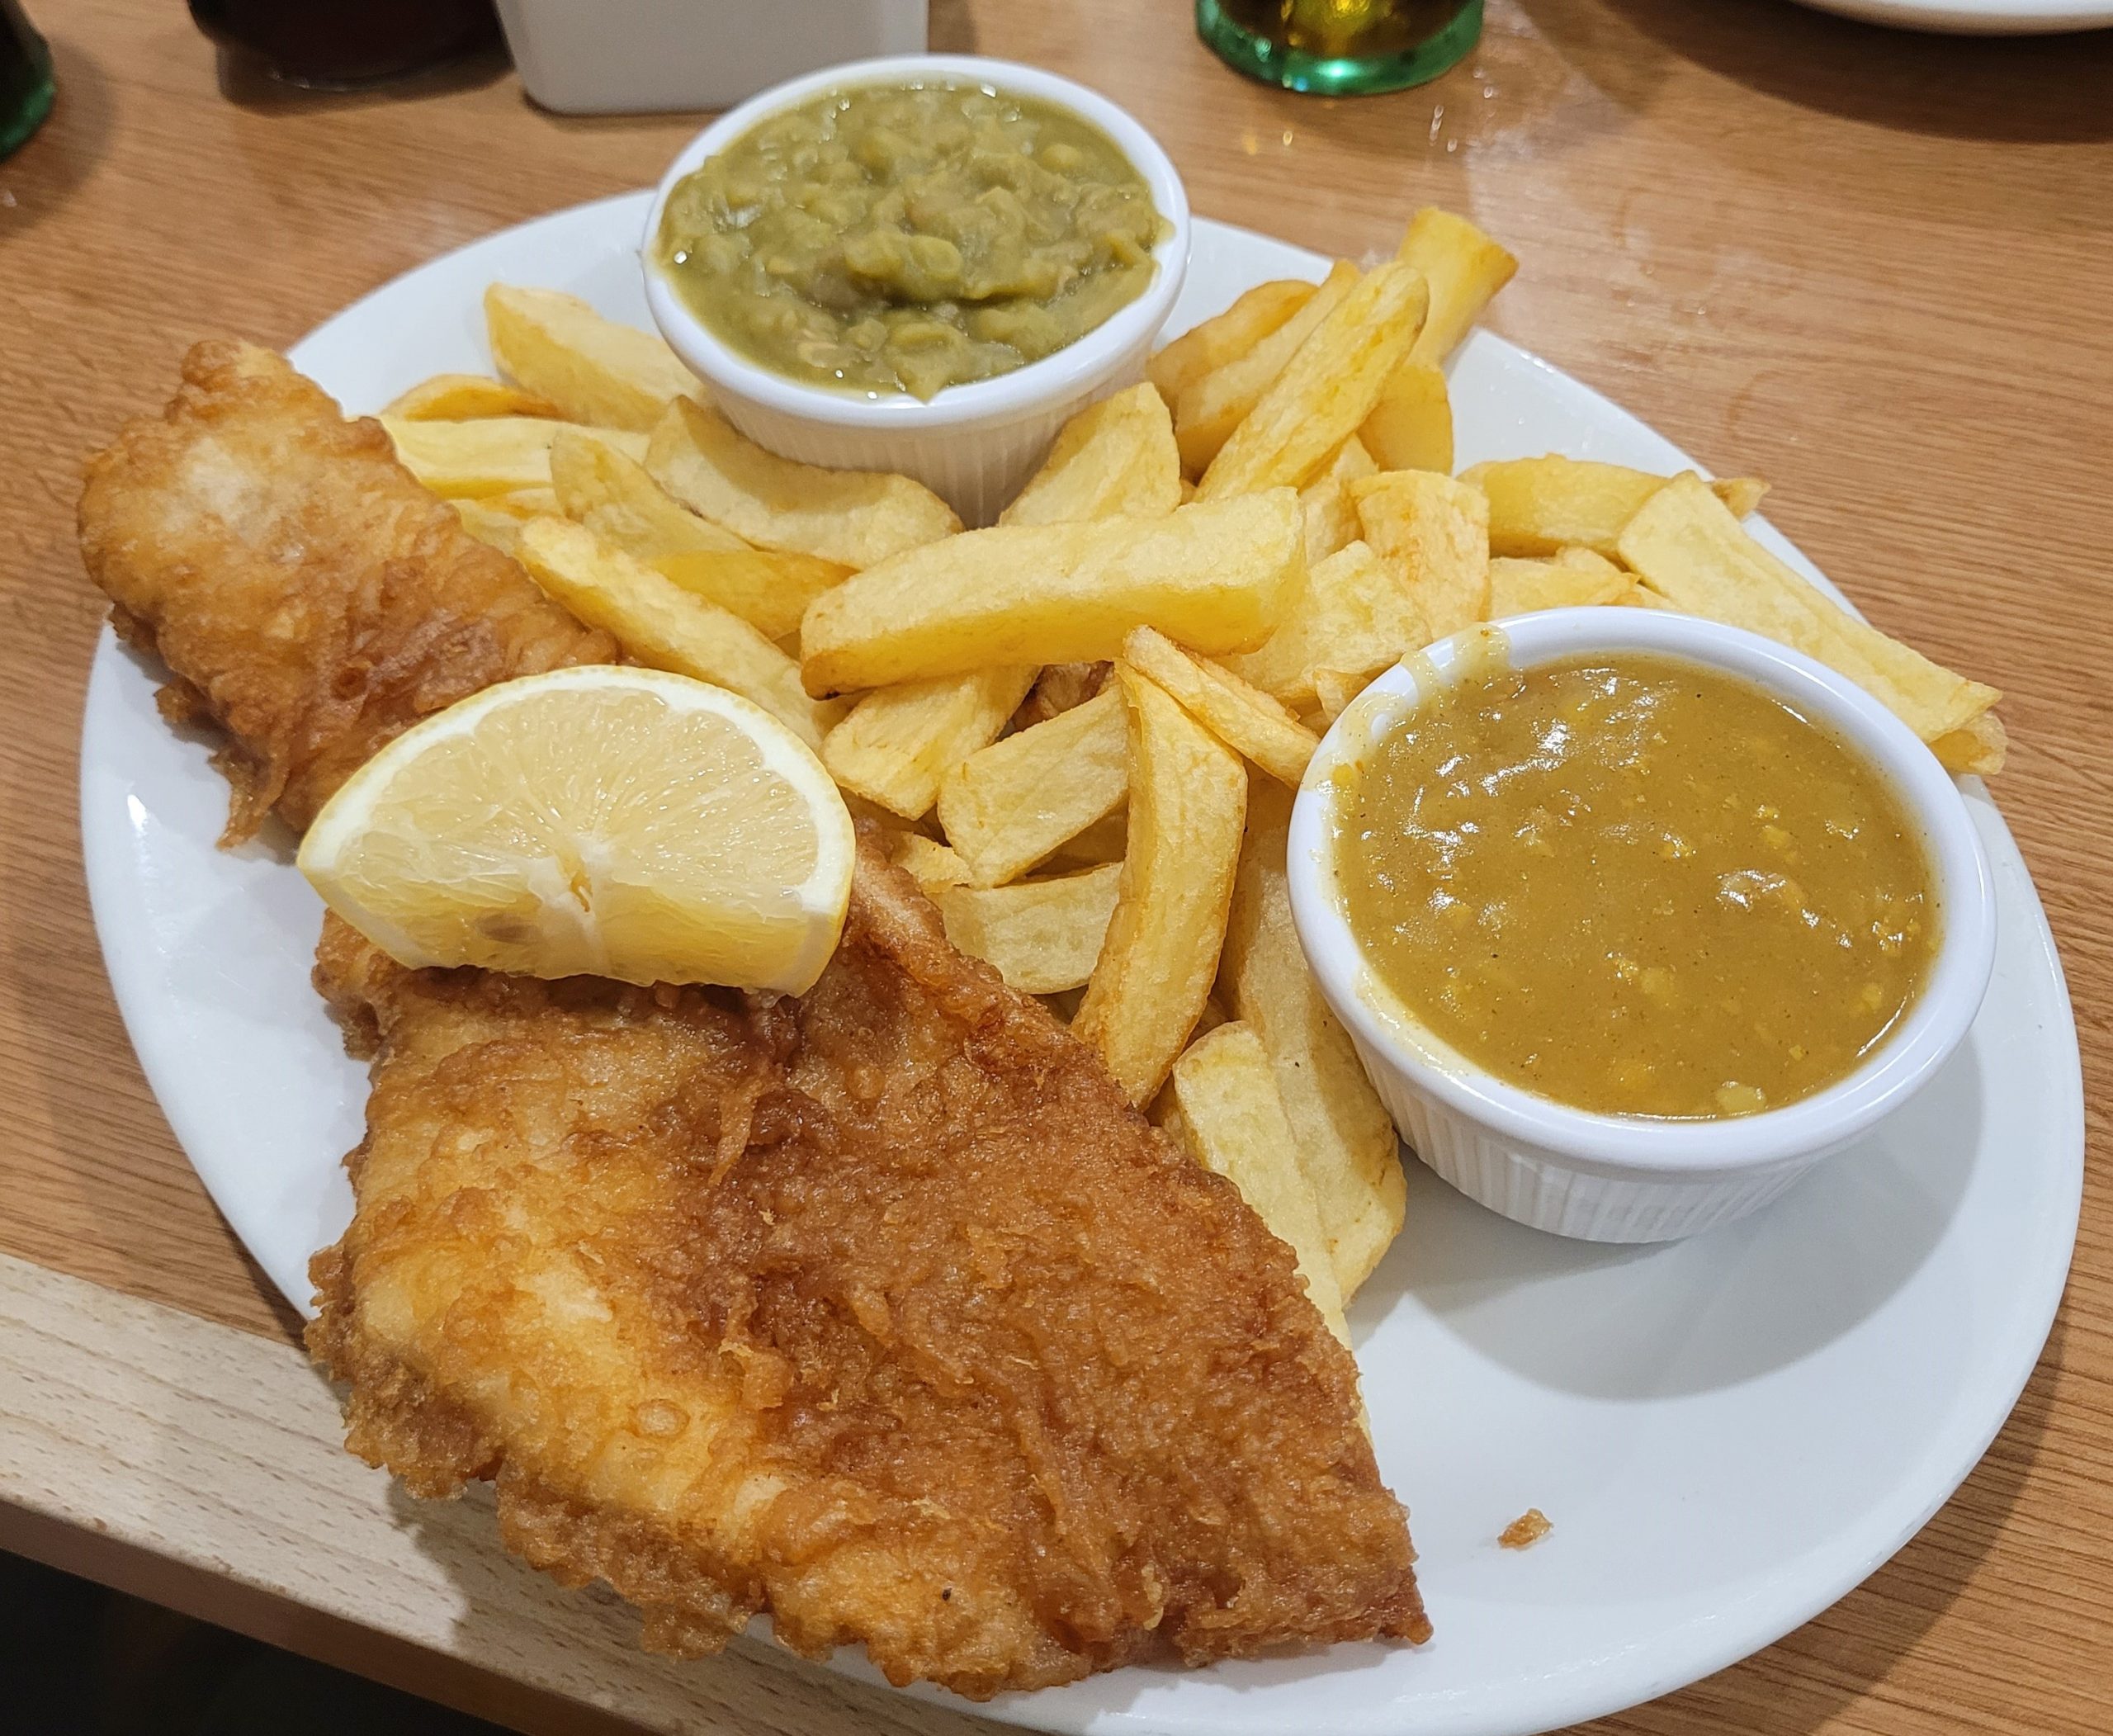 Fish and Chip dinner at Elite Fish & Chips